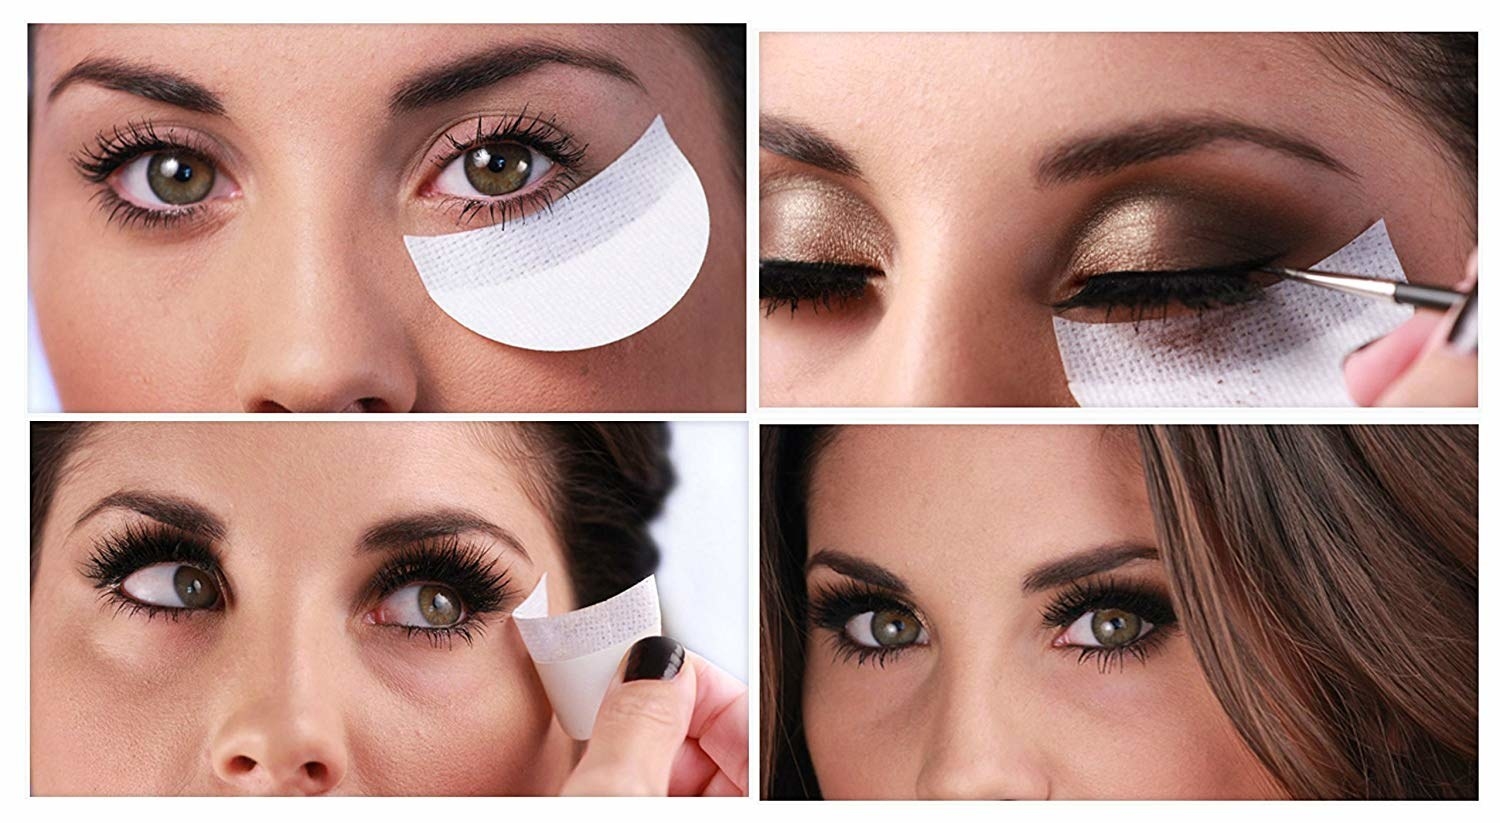 model puts on shield under eye, does makeup, peels off shield, and shows off eyes